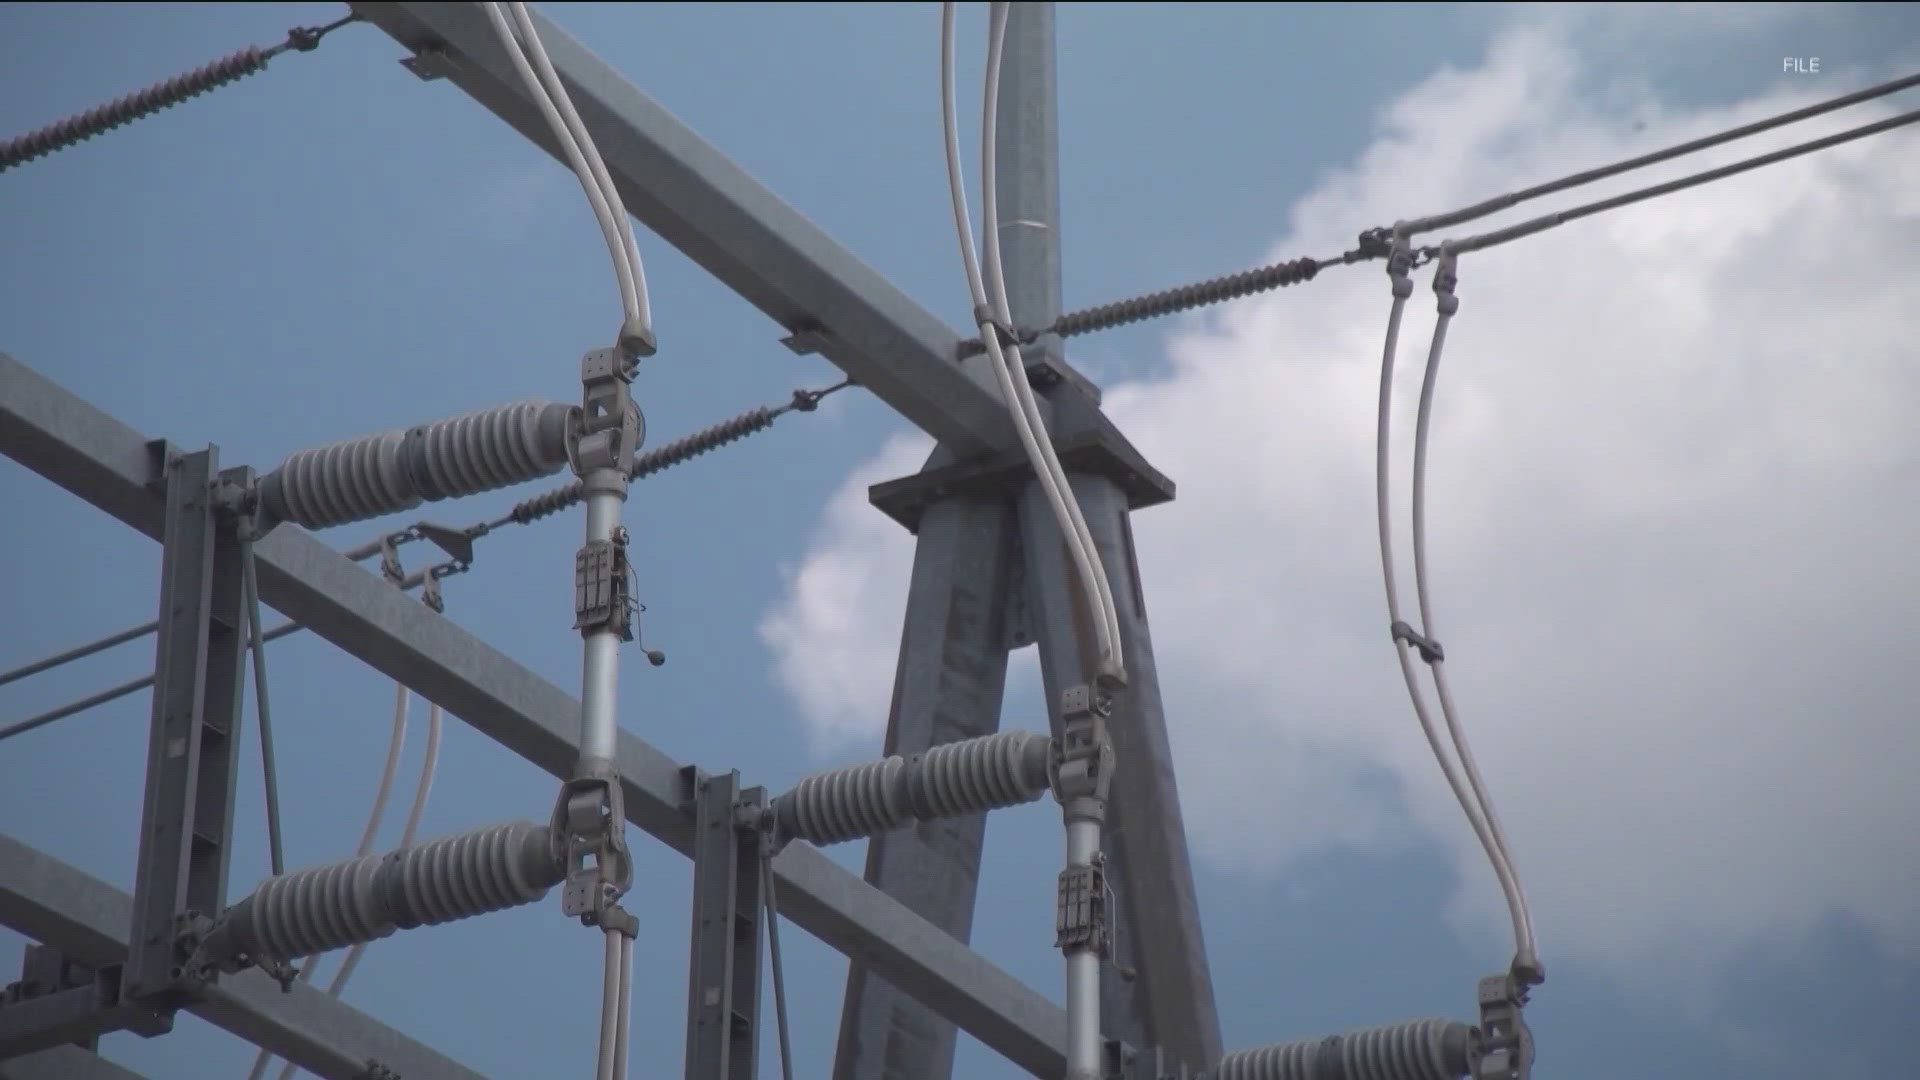 The state grid operator set 10 all-time peak demand records last summer.